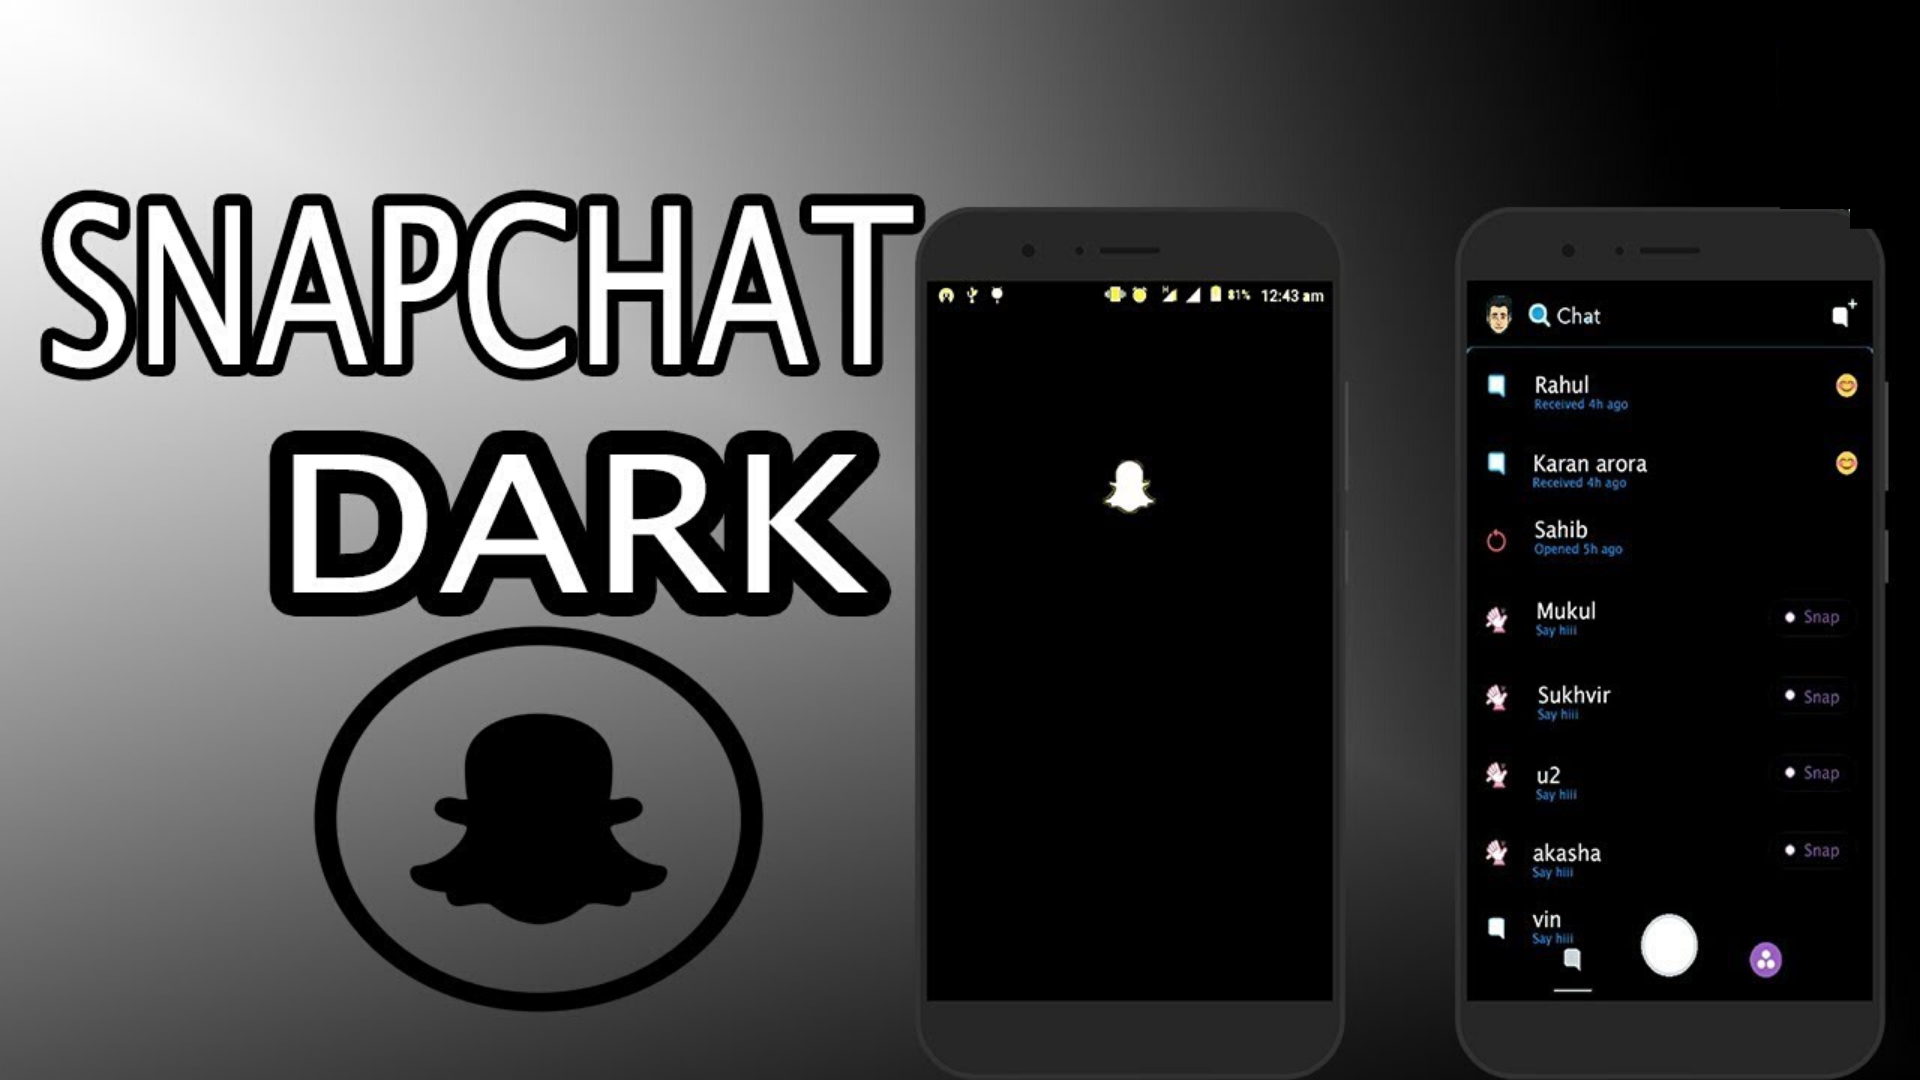 Steps To Enable Dark Mode On Snapchat